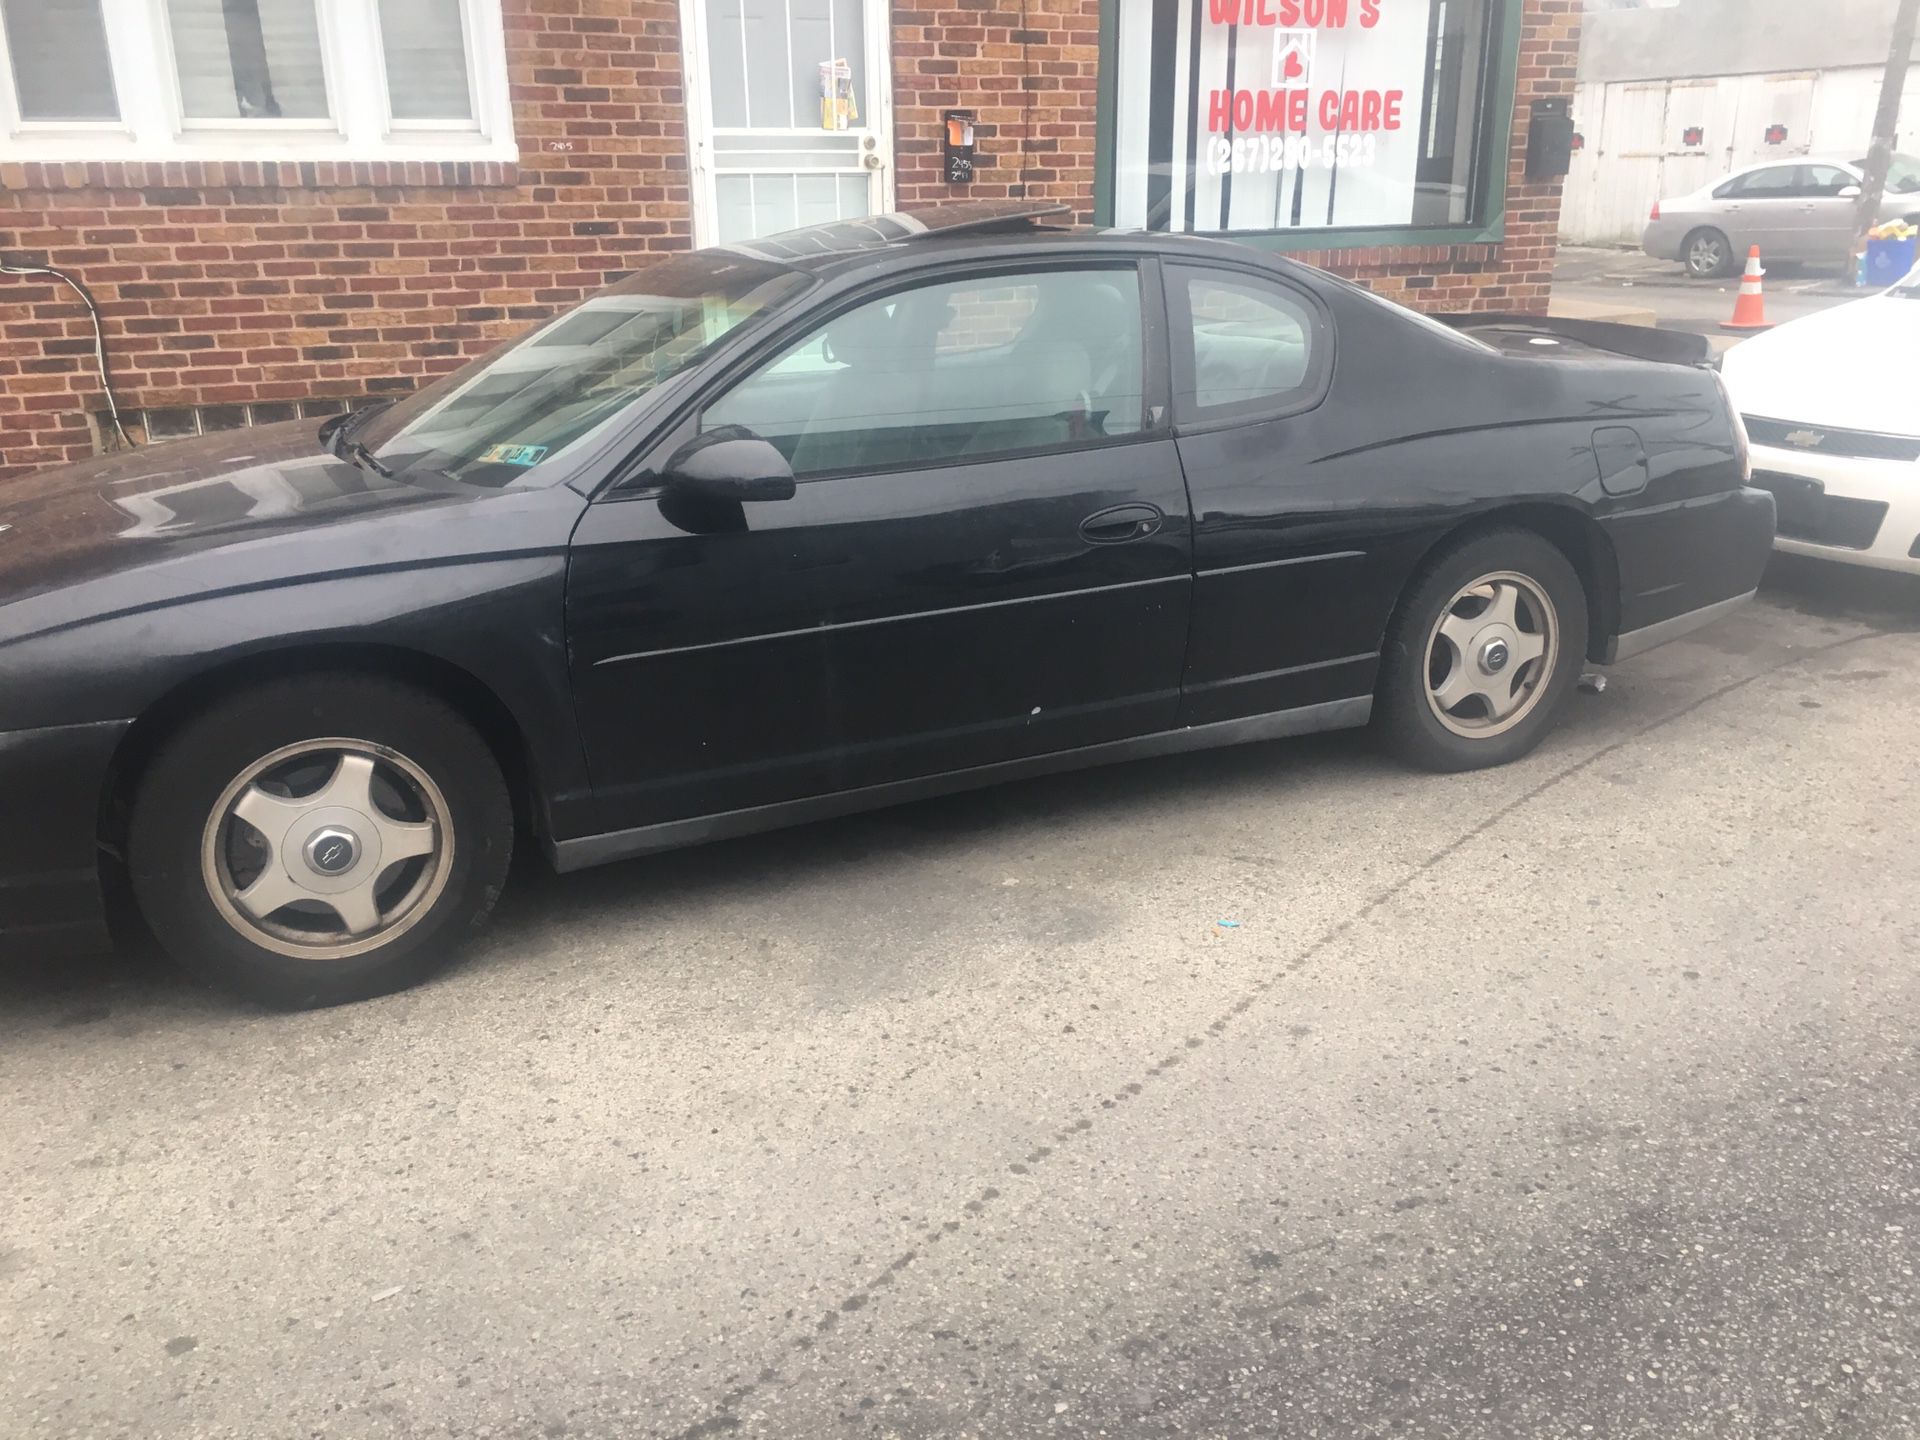 2002 Chevrolet Monte Carlo (part out)